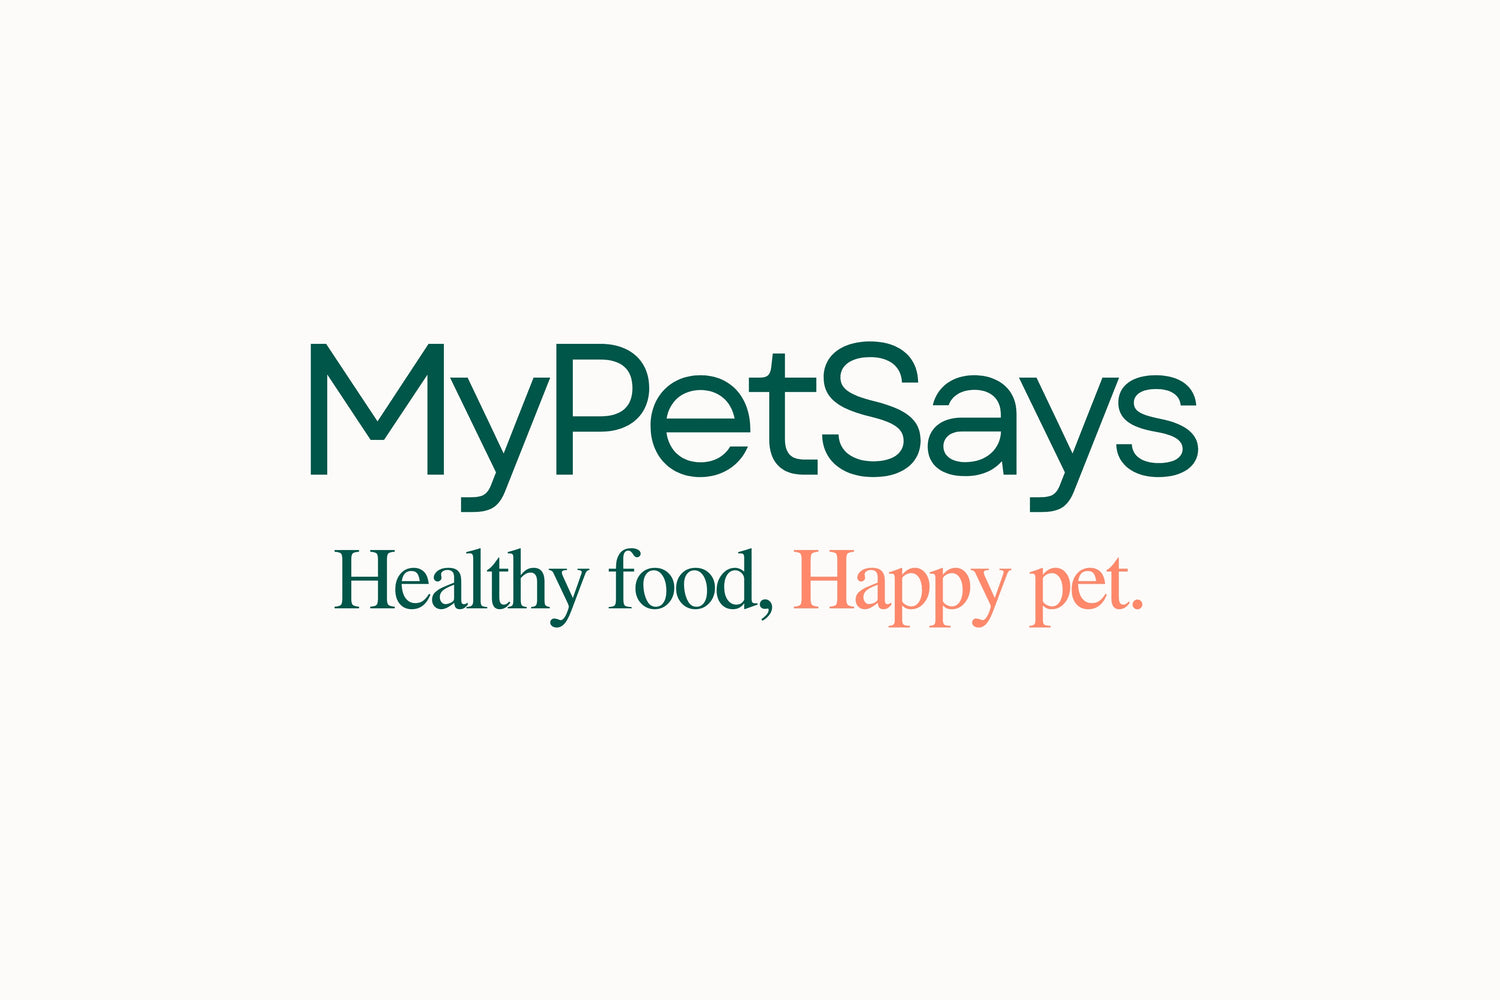 MyPetSays Healthy Food, Happy Pet Fresh ingredients gently cooked for complete nutrition